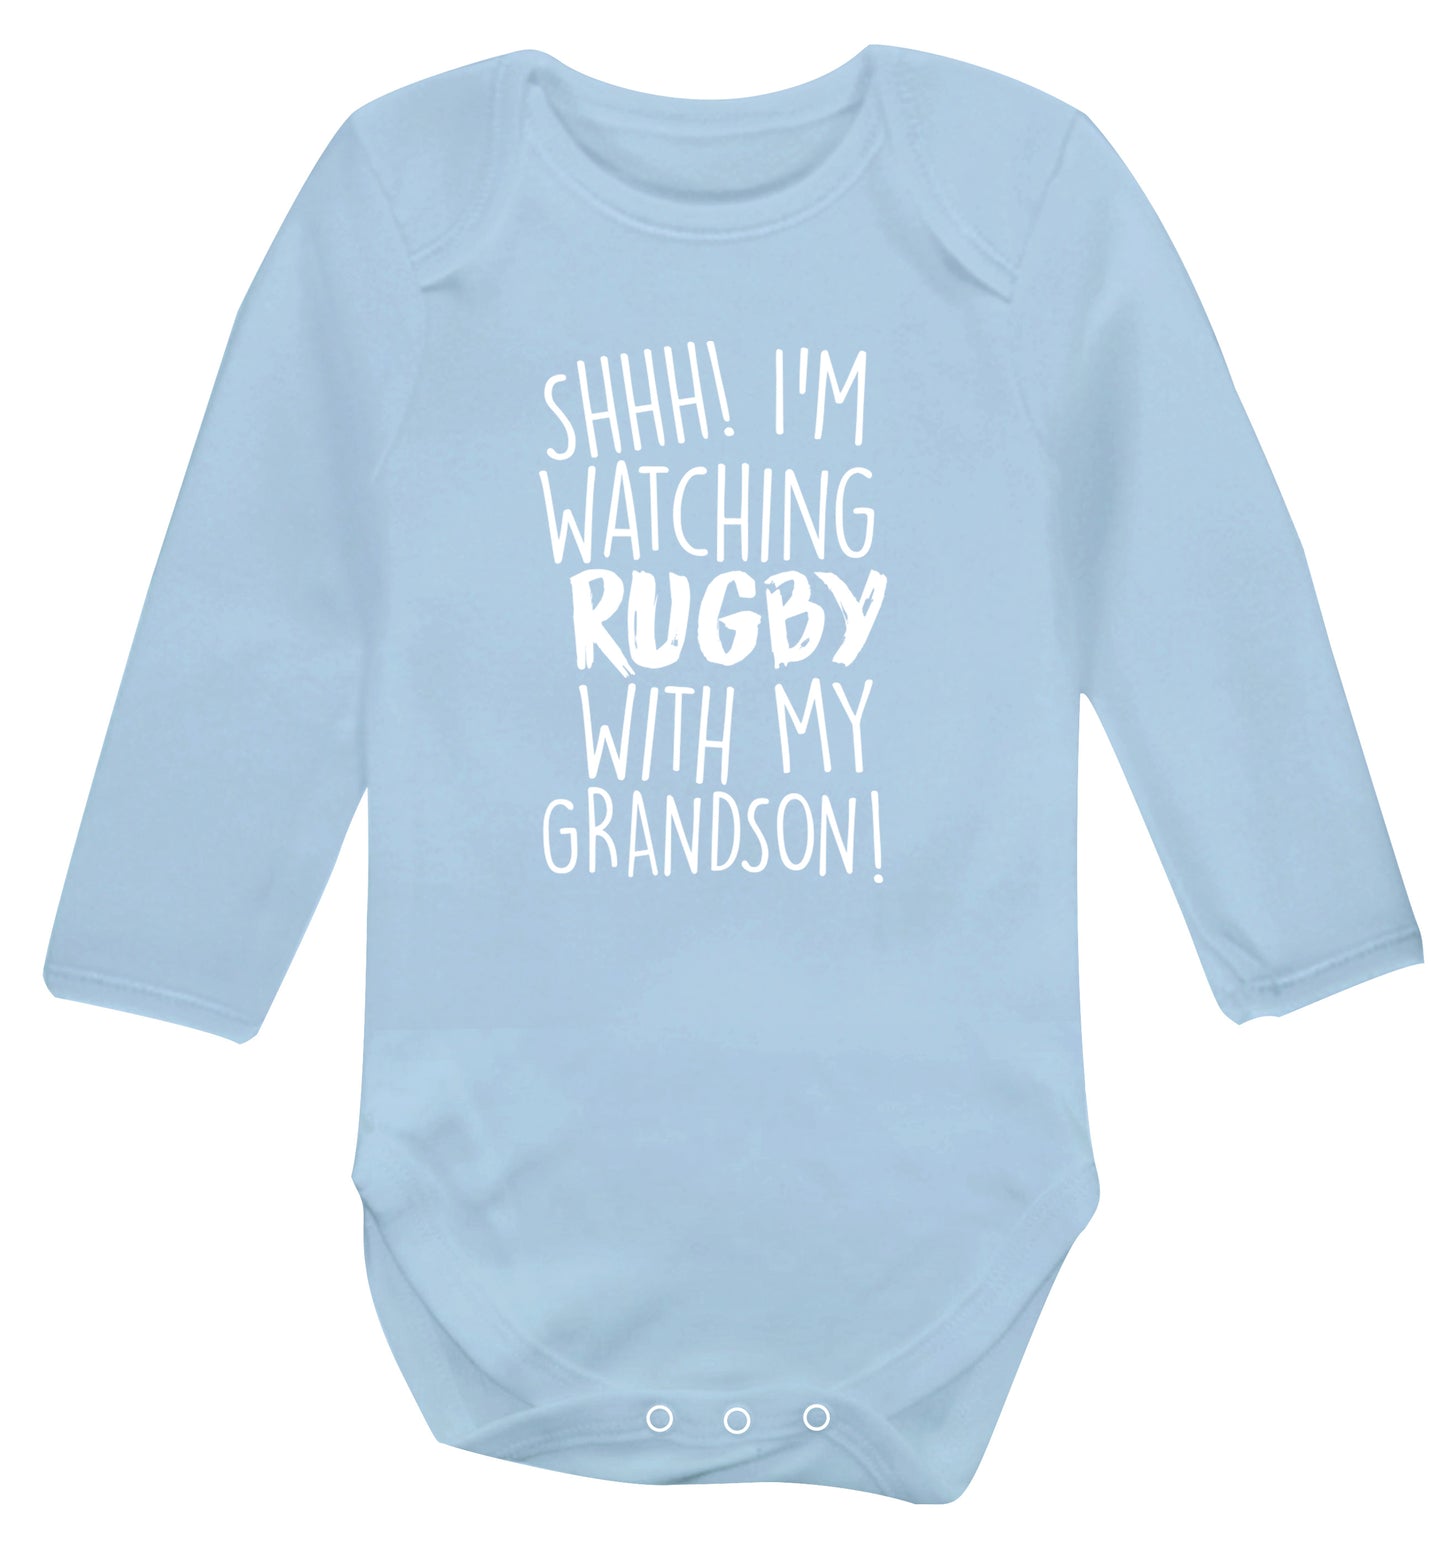 Shh I'm watching rugby with my grandson Baby Vest long sleeved pale blue 6-12 months